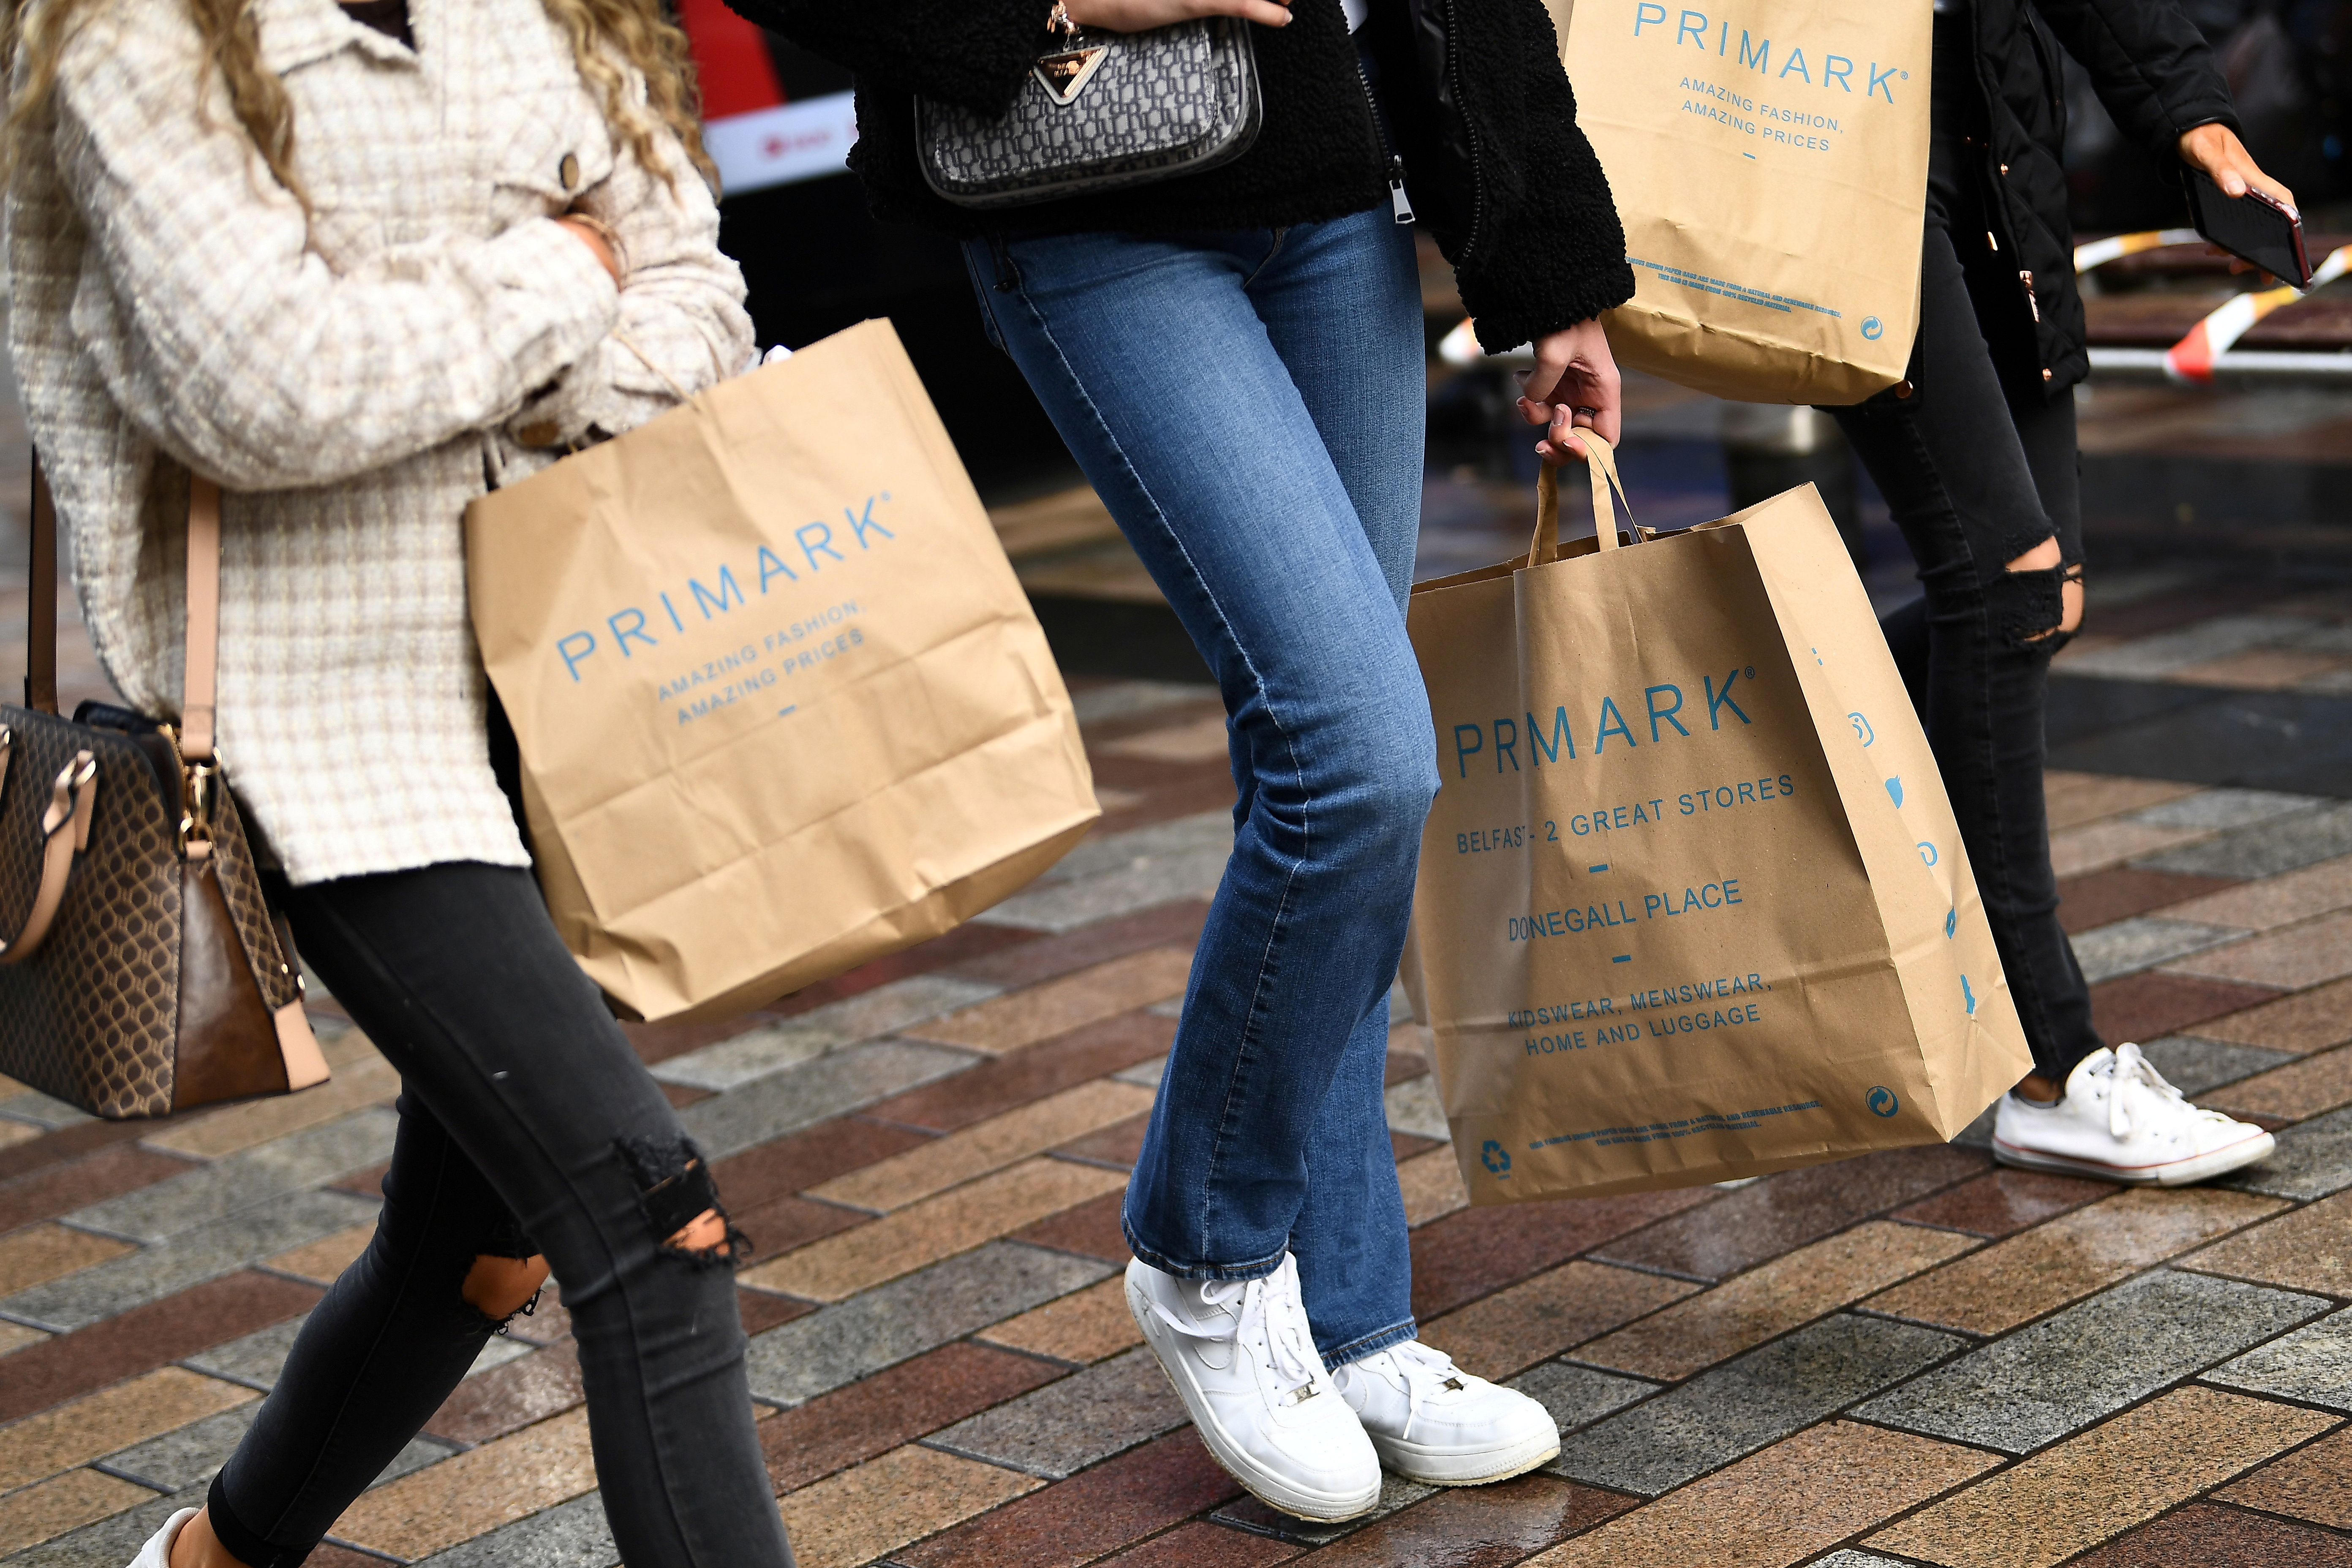 People carry Primark shopping bags after retail restrictions due to coronavirus disease (COVID-19) eased, in Belfast, Northern Ireland, May 4, 2021. REUTERS/Clodagh Kilcoyne/File Photo